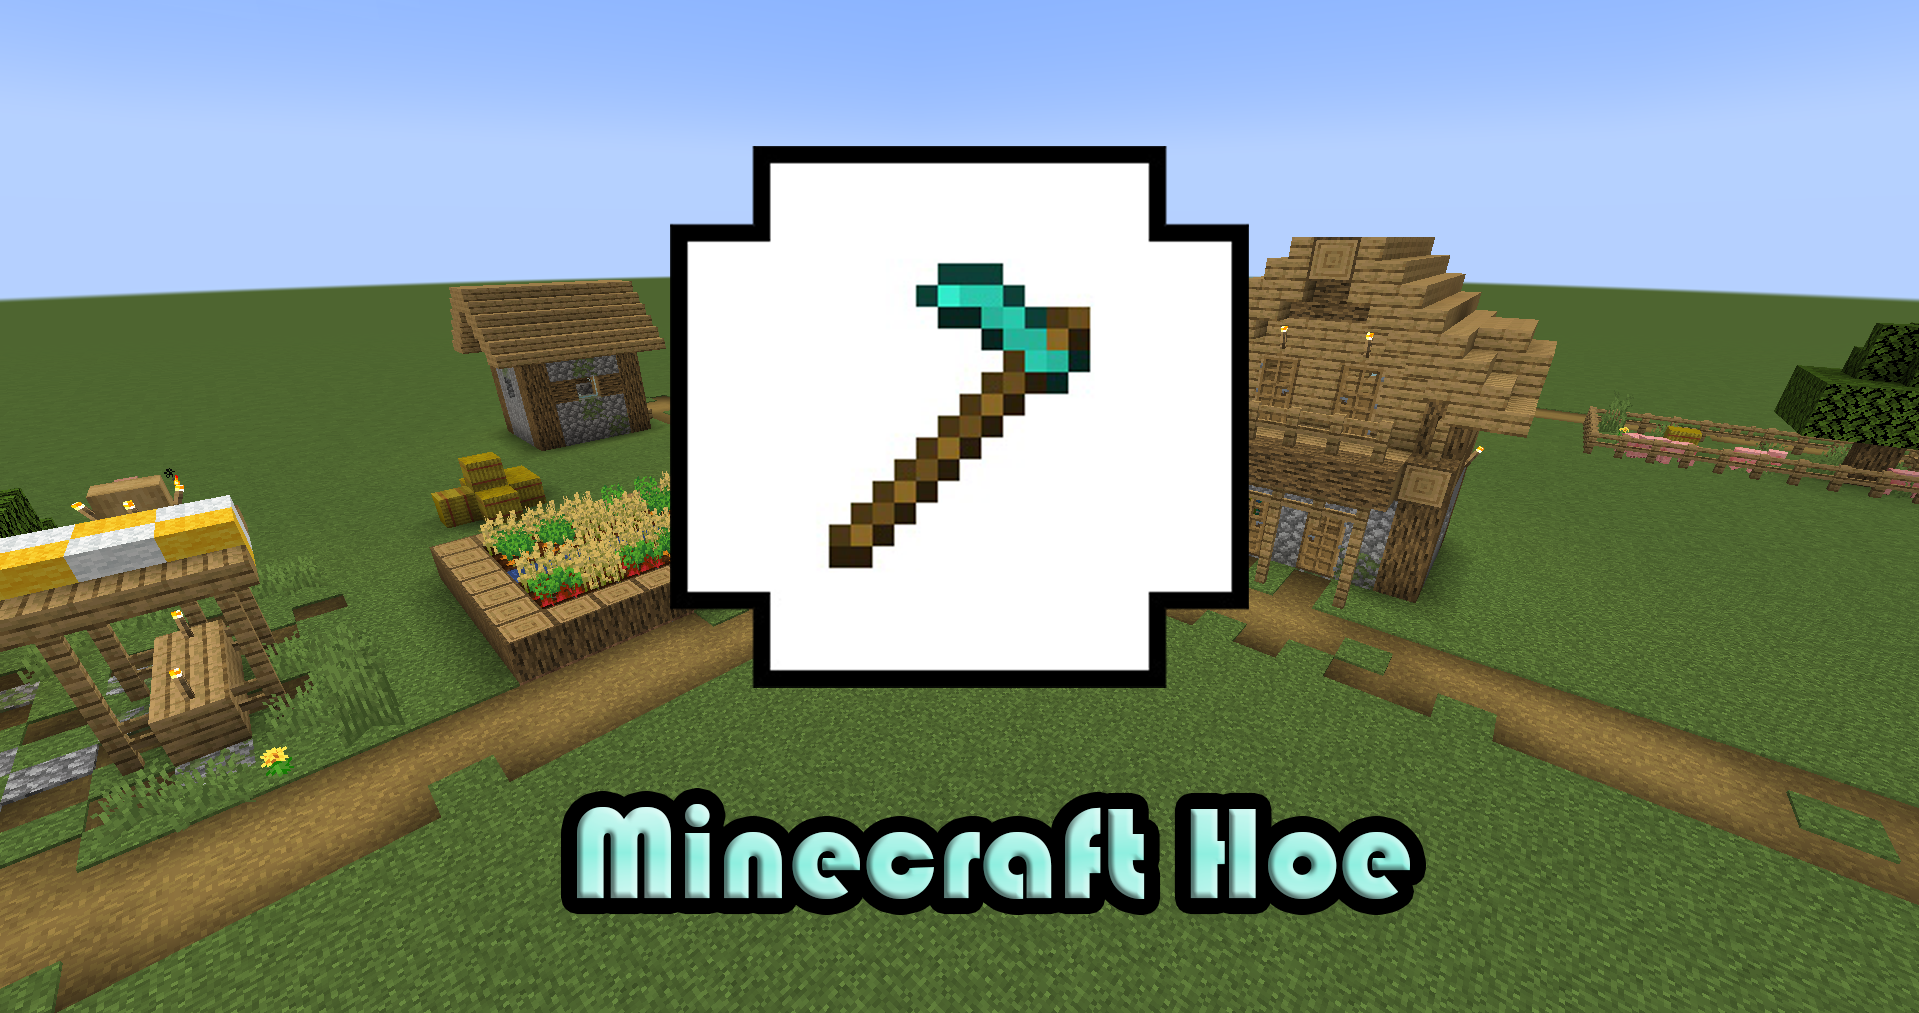 How To Use A Hoe in Minecraft